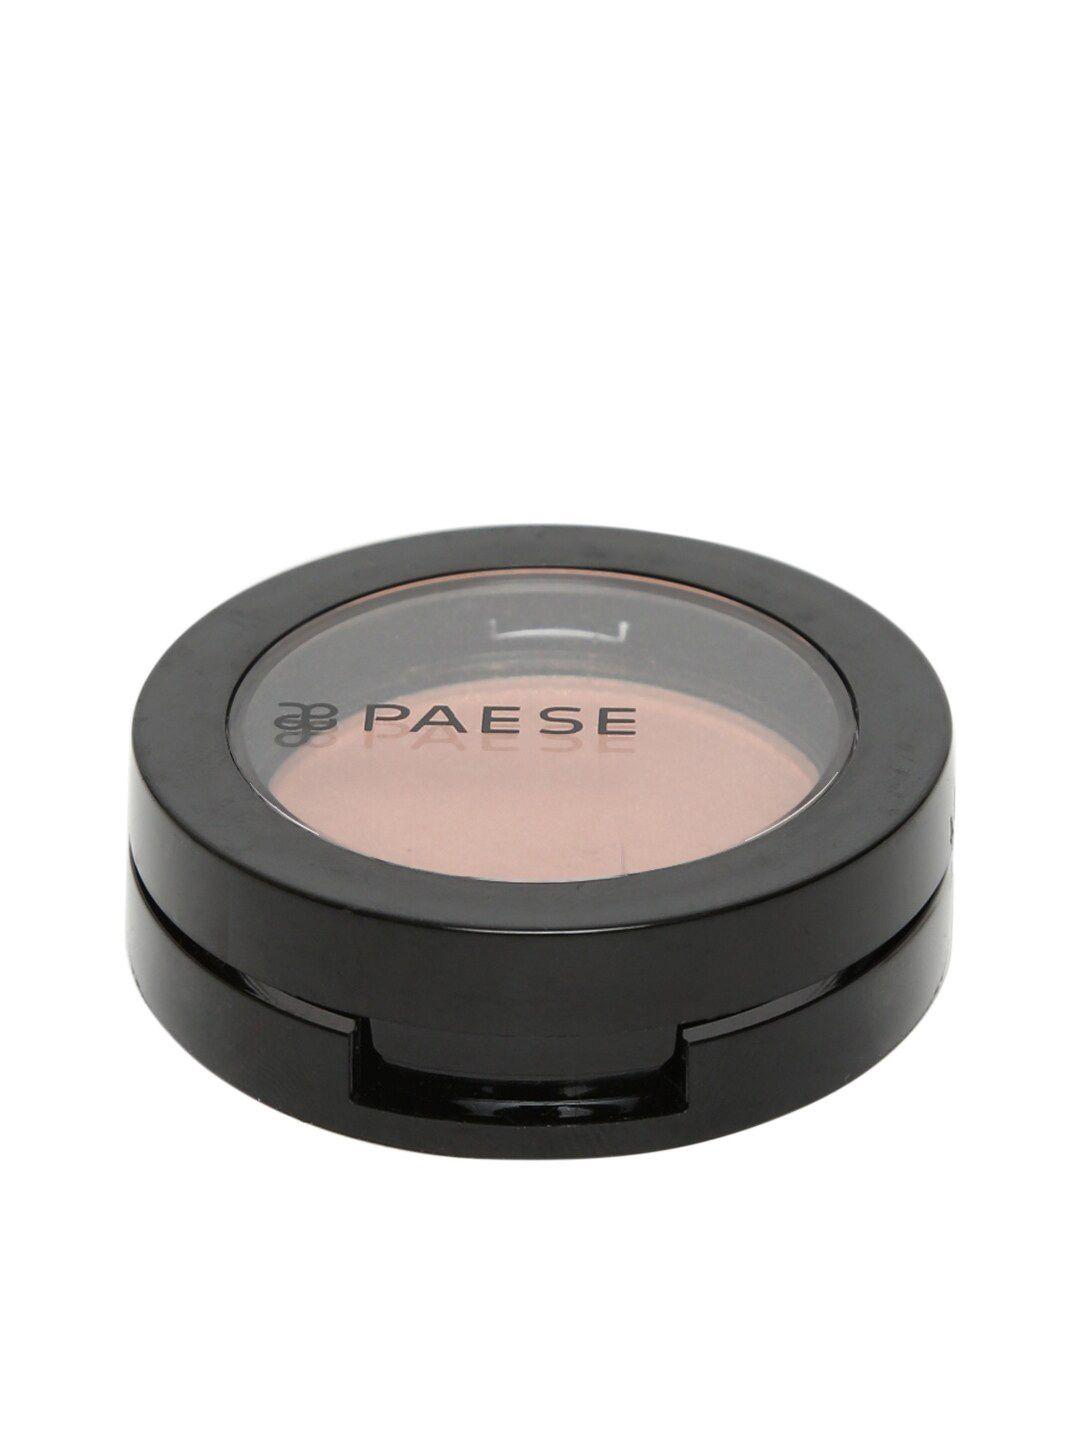 paese cosmetics blush with argan oil - 48